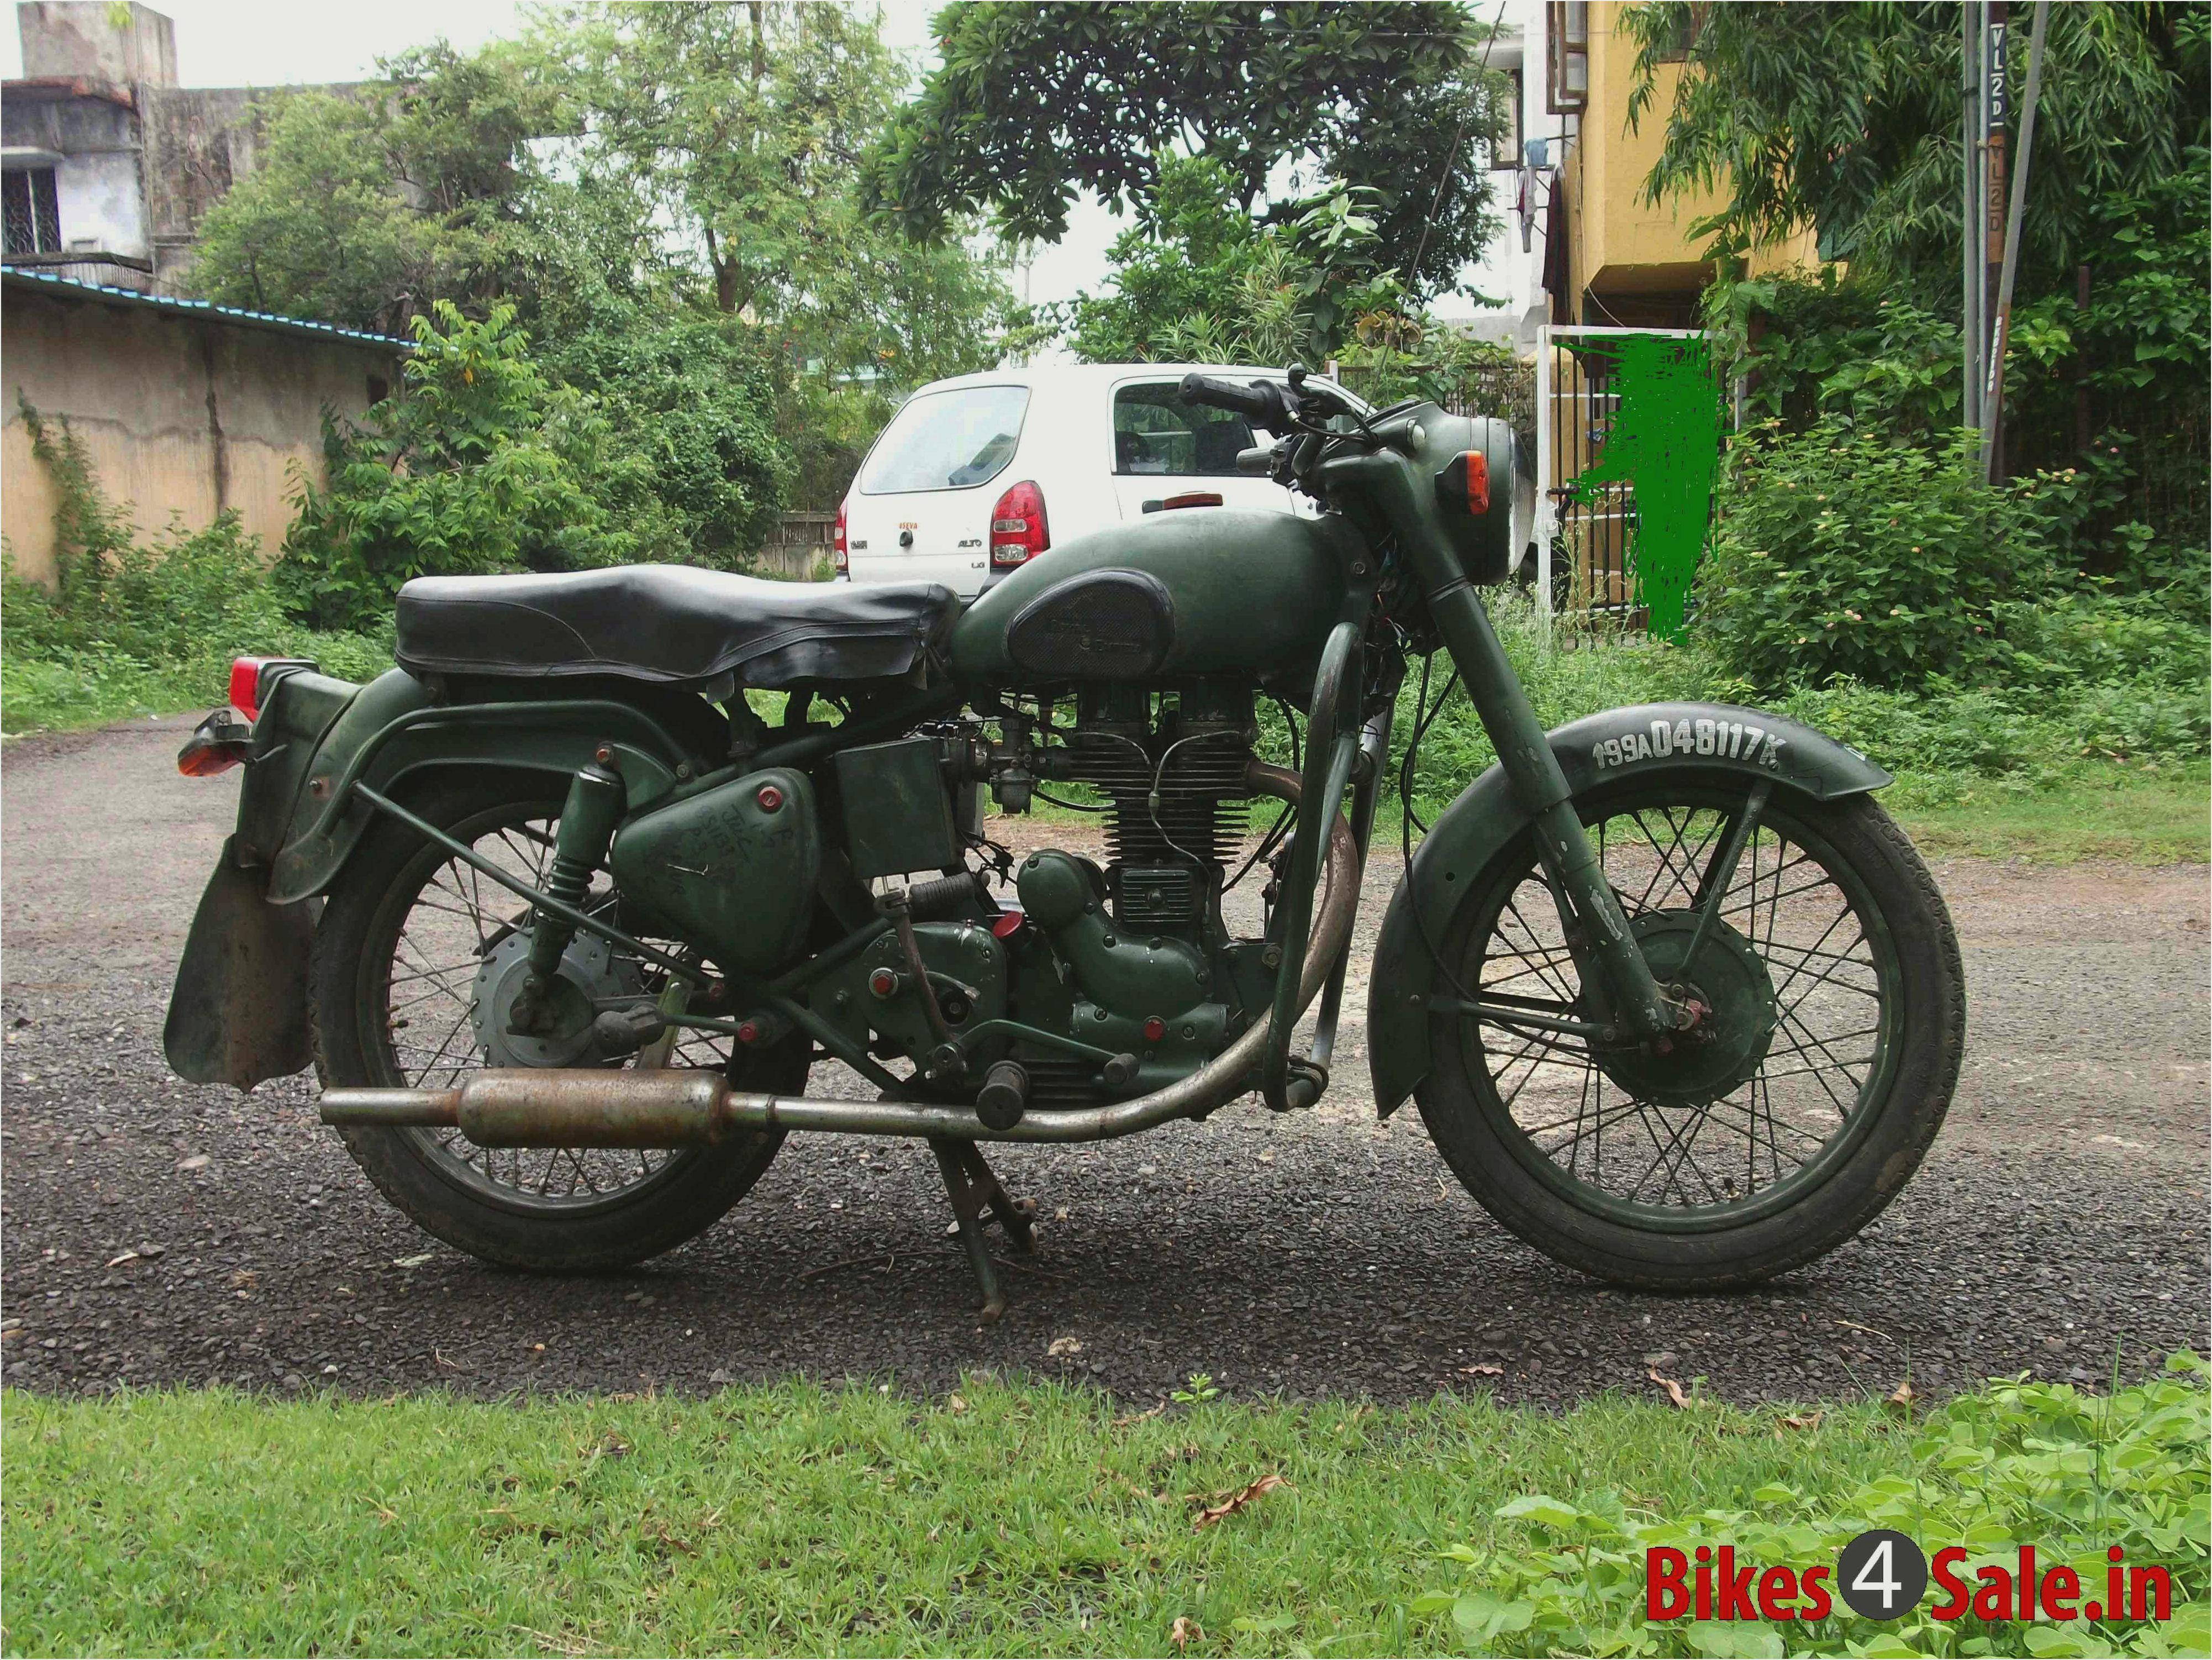 Royal Enfield Bullet 350 Army: pics, specs and information